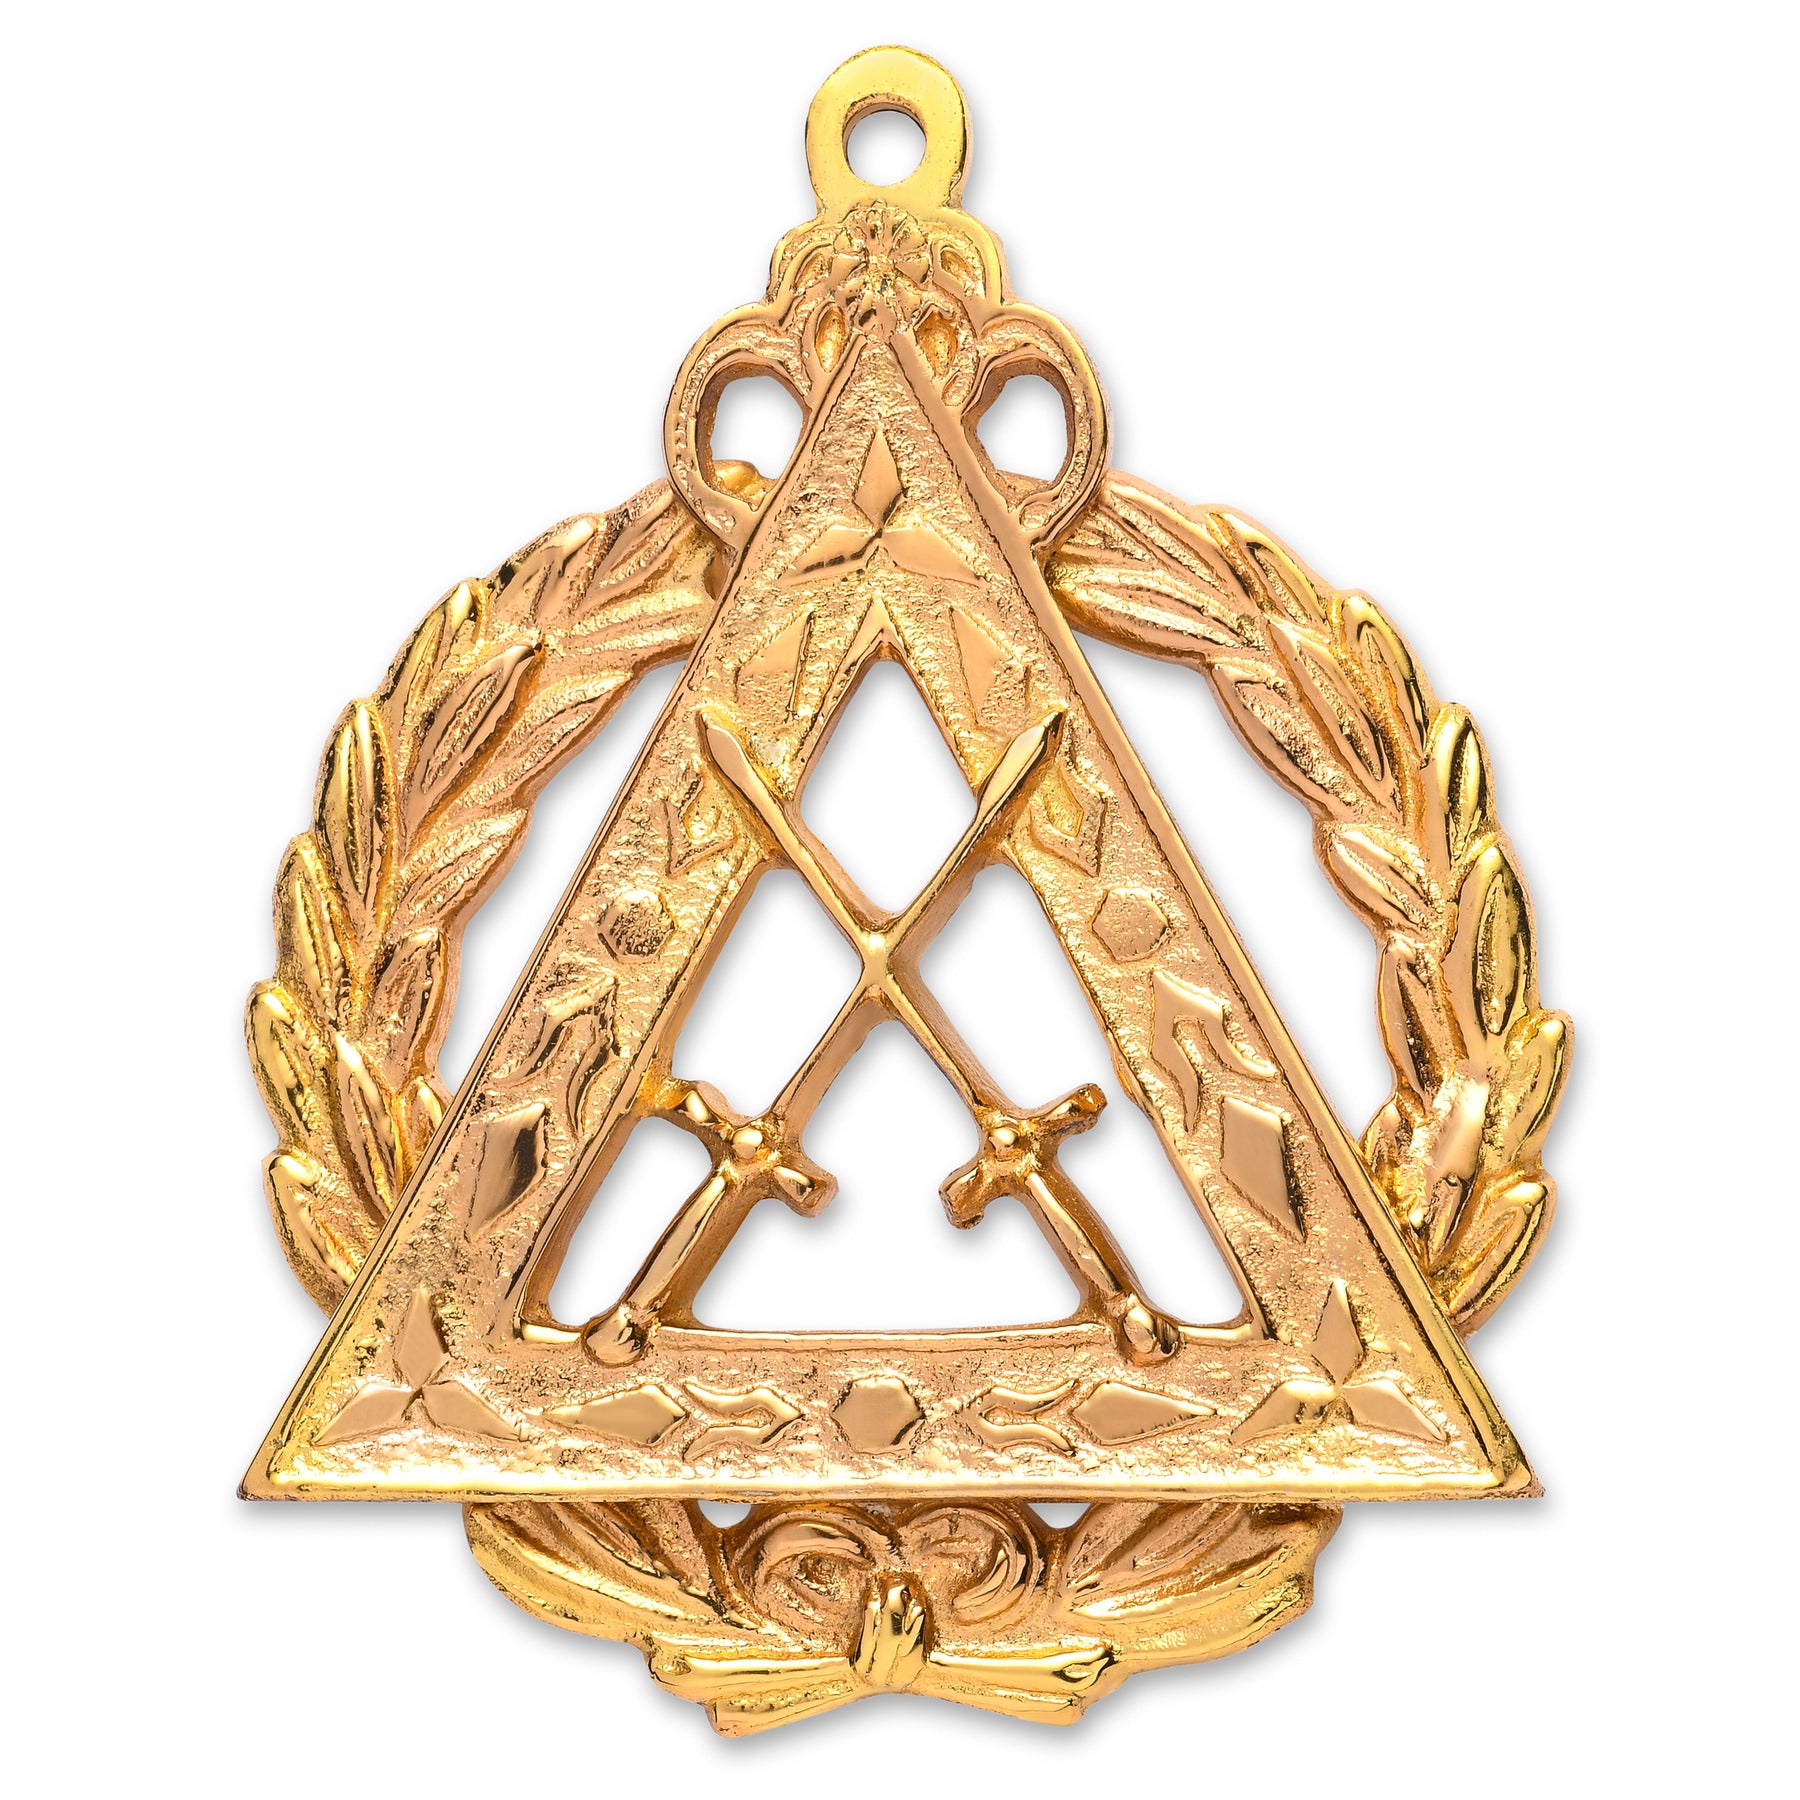 Grand Sentinel Royal Arch Chapter Officer Collar Jewel - Gold Plated - Bricks Masons